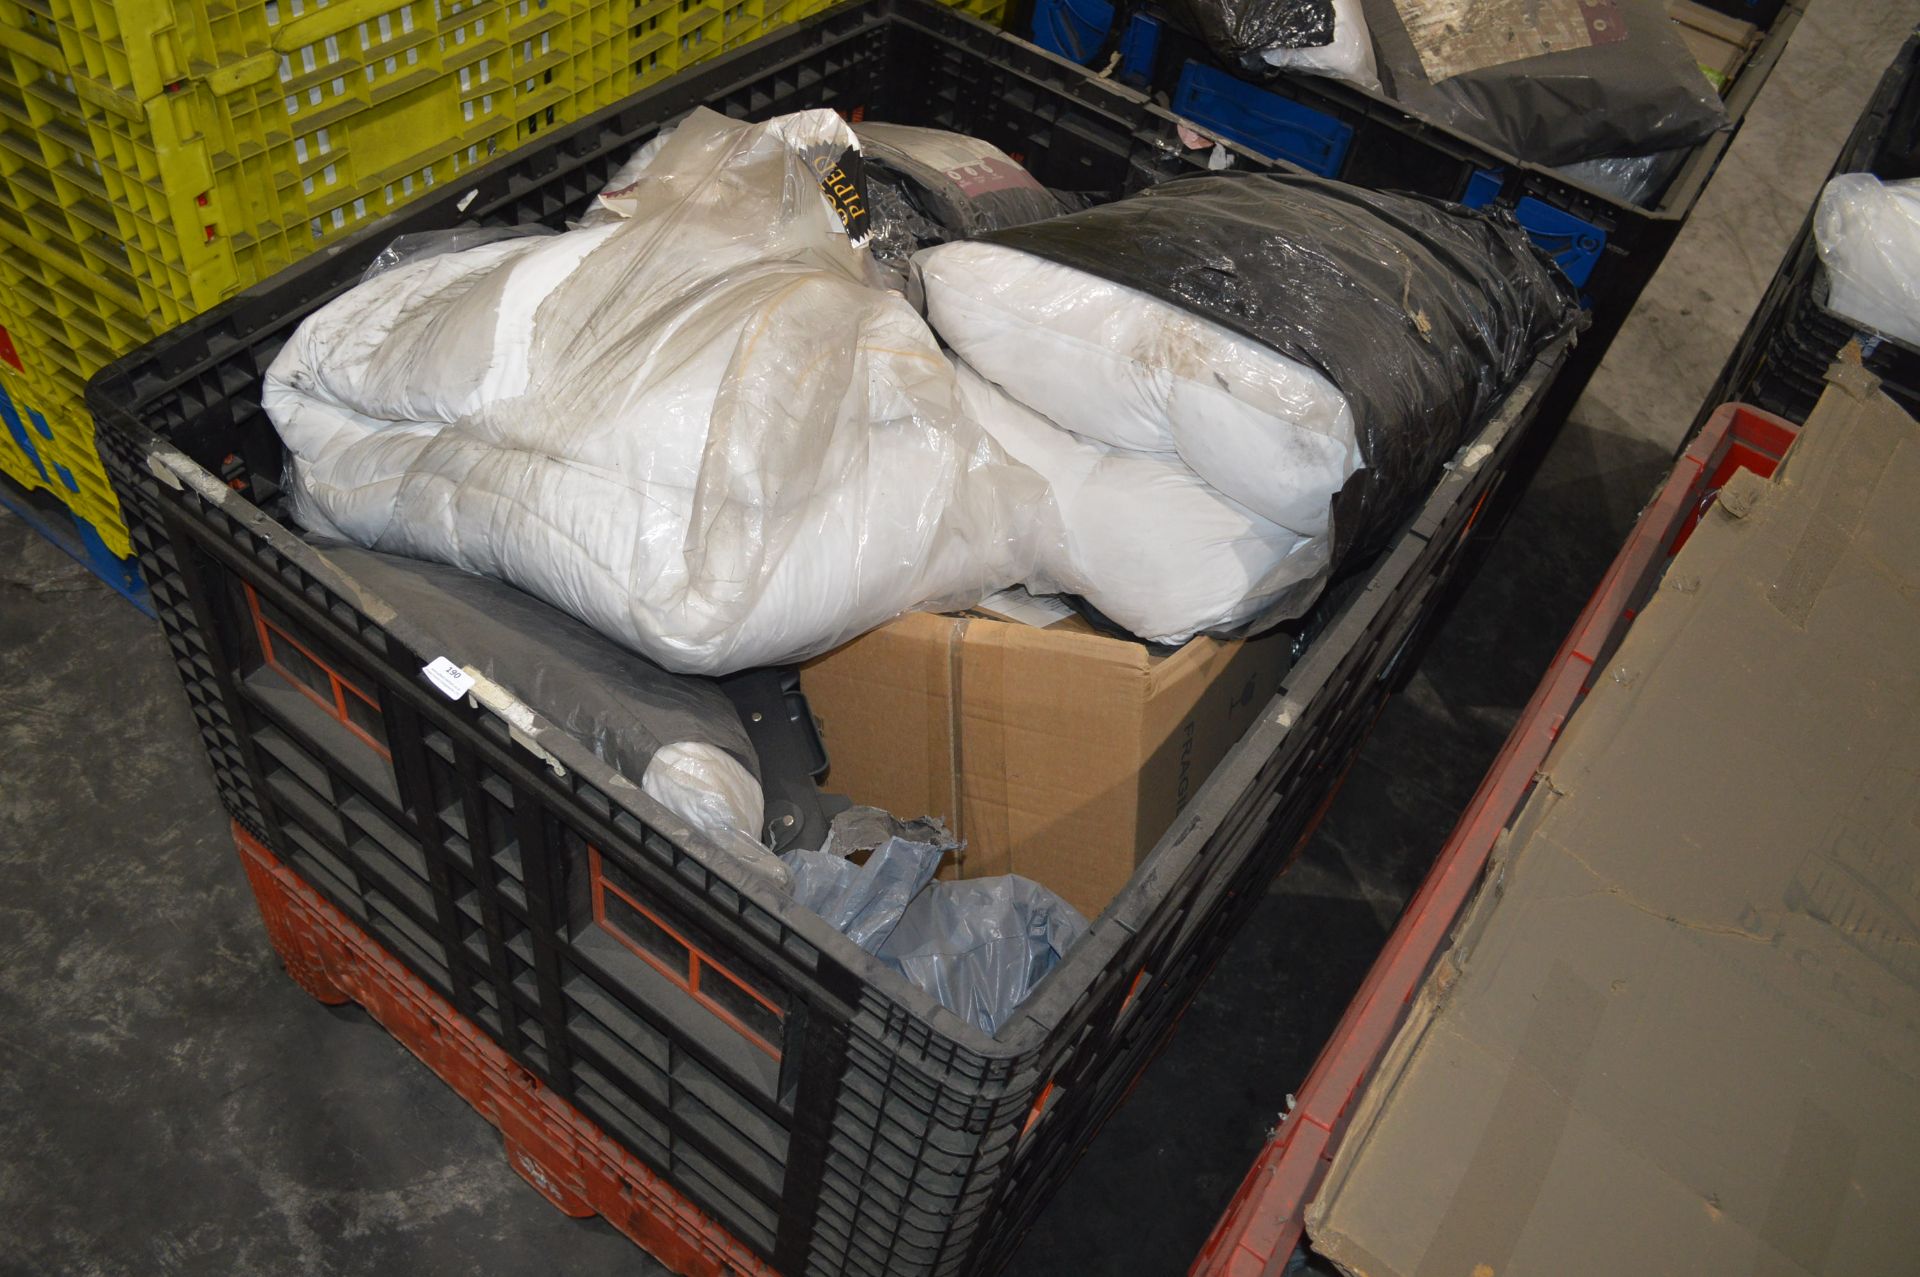 *Pallet of Assorted Returned Goods (unchecked and uninspected)